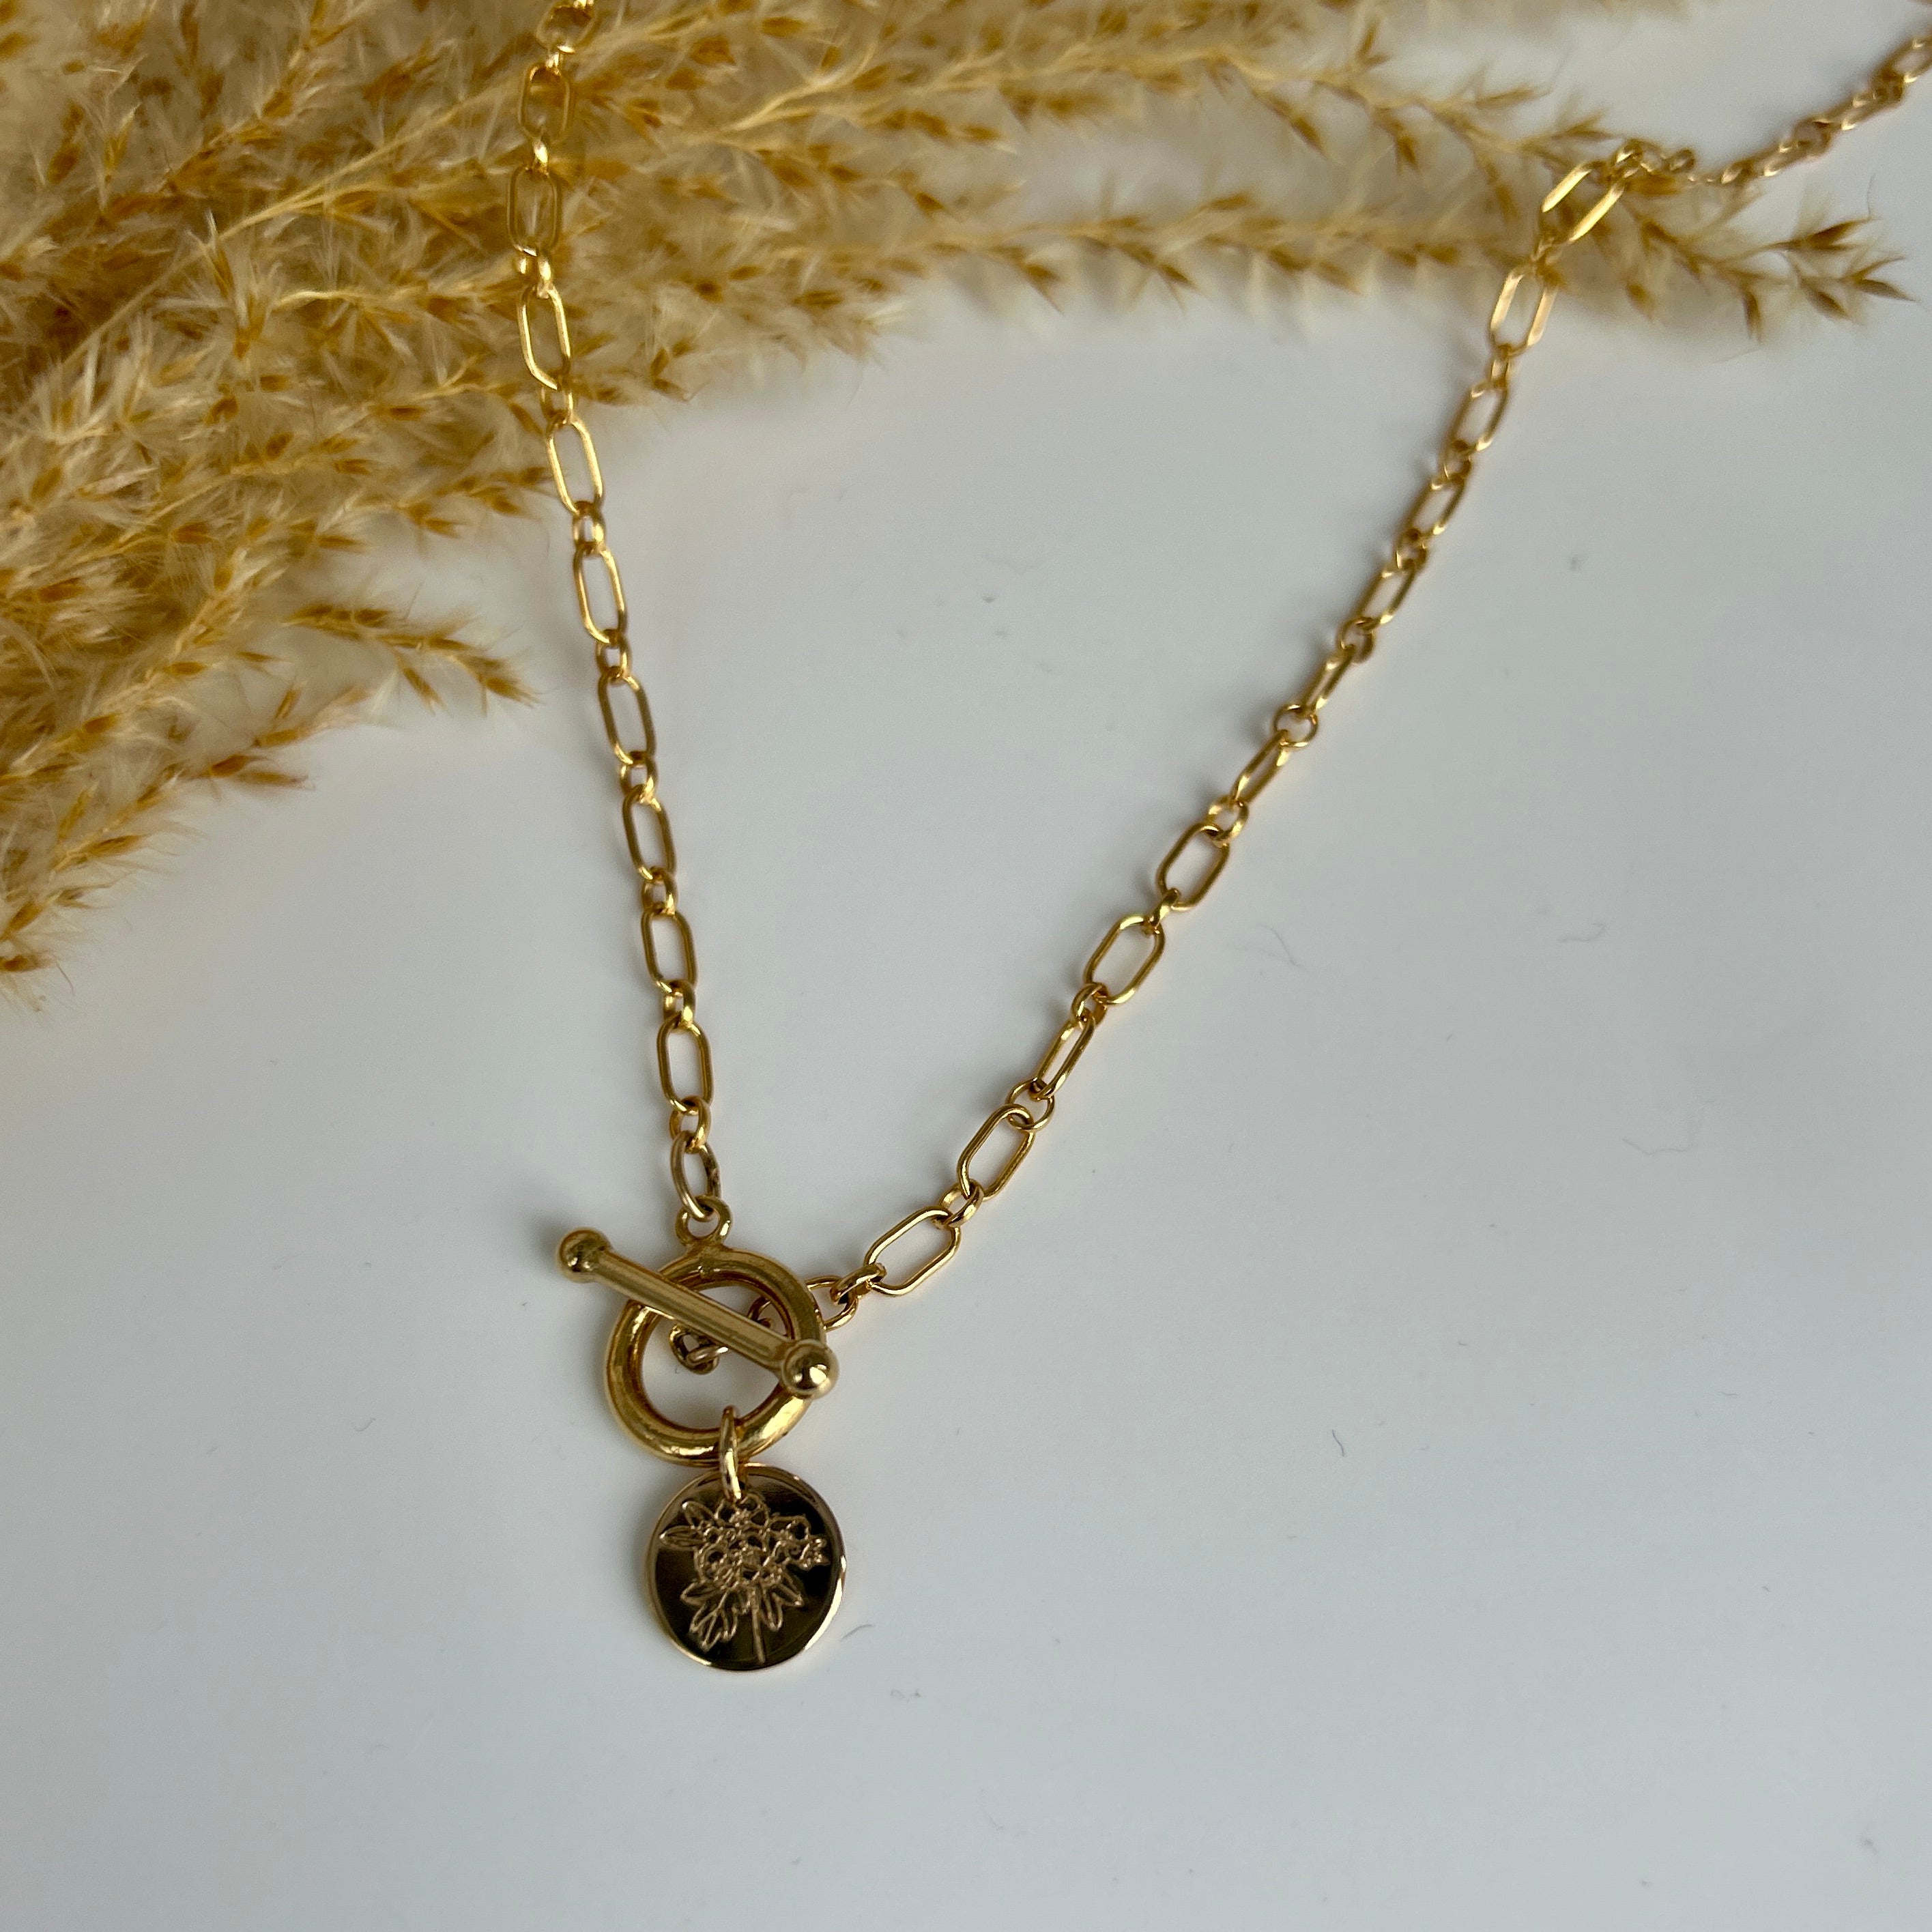 Toggle clasp gold filled necklace with birth flower pendant , hawthorn flower 